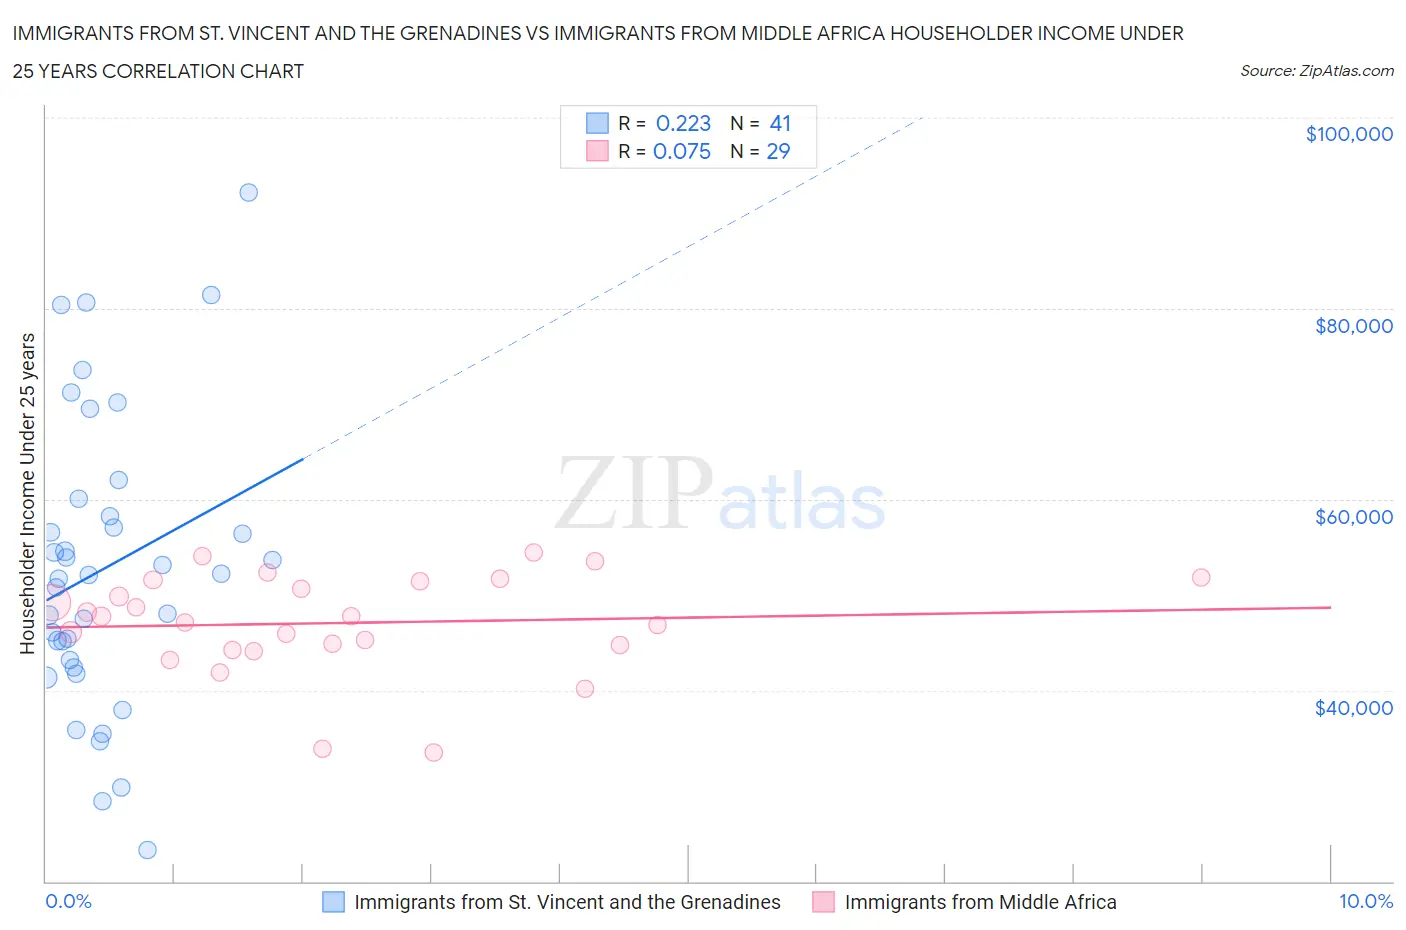 Immigrants from St. Vincent and the Grenadines vs Immigrants from Middle Africa Householder Income Under 25 years